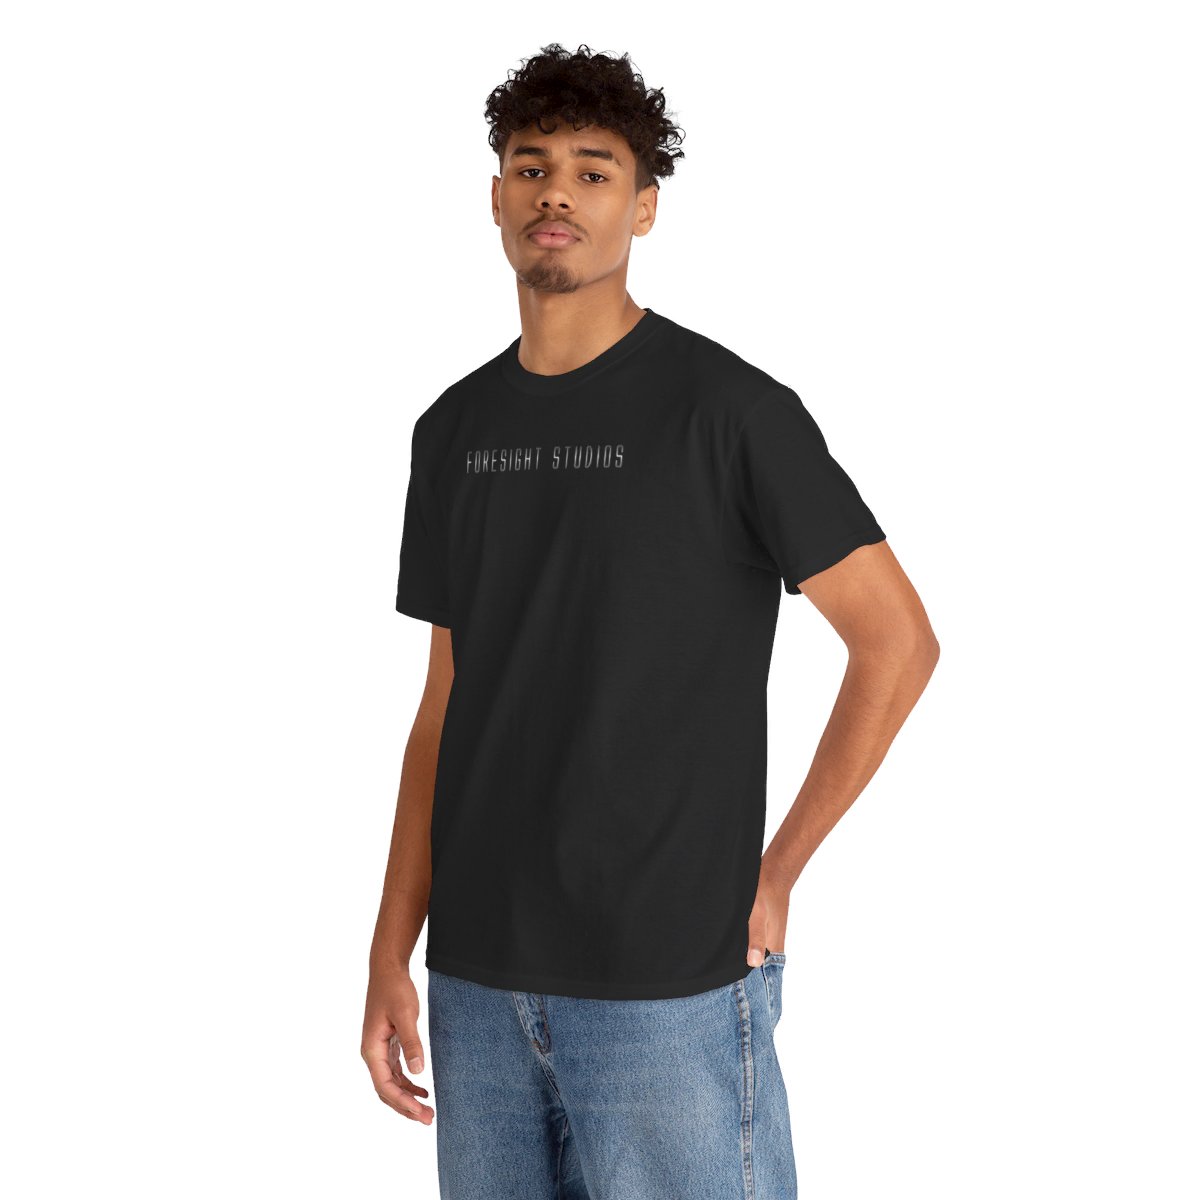 Foresight Studios Unisex Heavy Cotton Tee (Comes with free Game) product thumbnail image